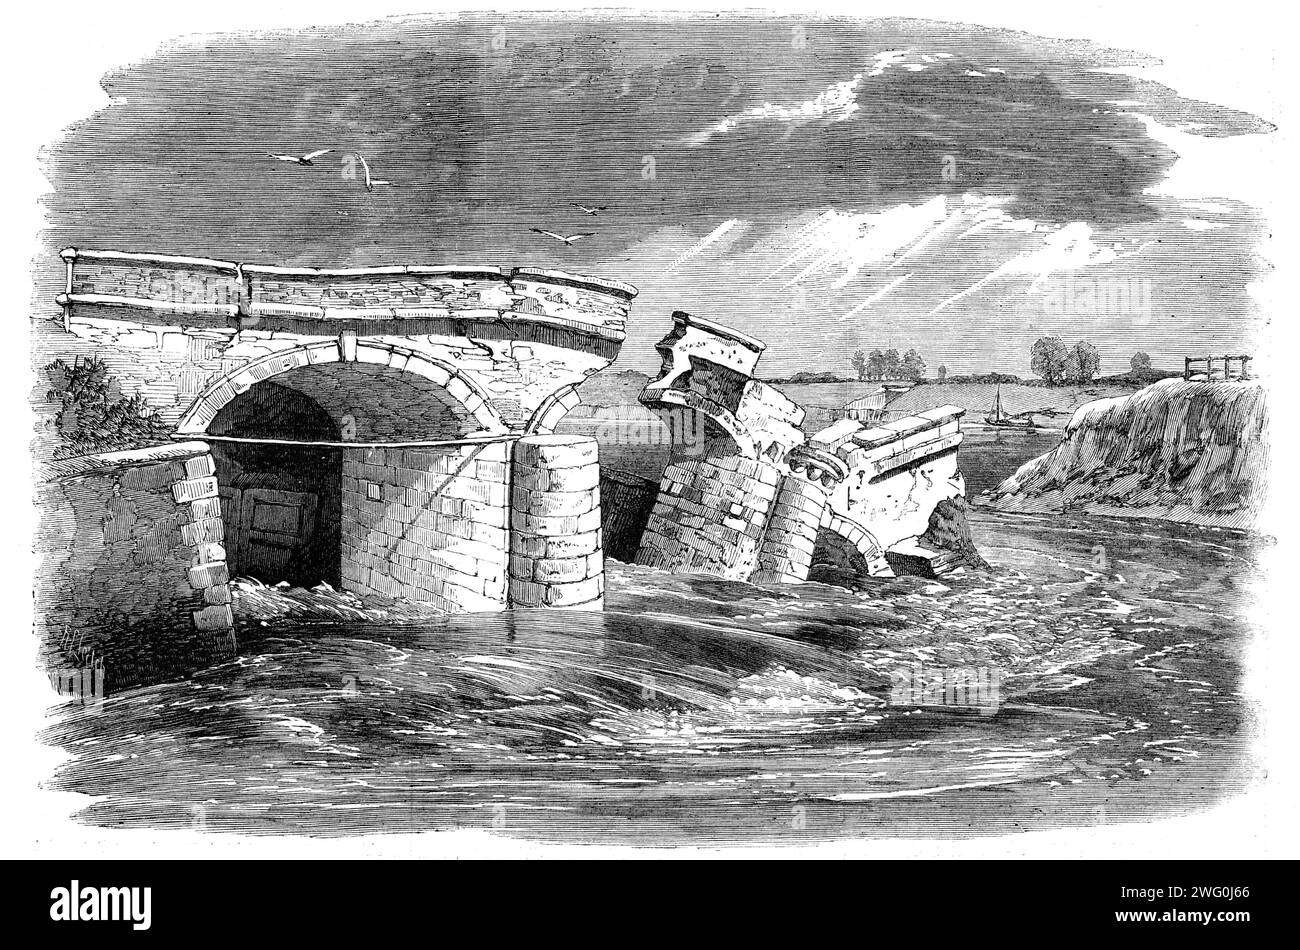 Fall of the middle level sluice on the west bank of the Ouse, about four miles from Lynn, Norfolk, 1862. '...tidal water found its way under the front apron of this sluice, and...before eleven o'clock the two arches gave way...The commissioners have been making great exertions...to make a dam across the main drain...but up to the present time, although many hundred men and horses have been employed, nothing has yet been accomplished to stop the flow of the tide...it is conjectured that from 10,000 to 20,000 acres of rich arable land will be entirely submerged...Such a calamity has not befallen Stock Photo